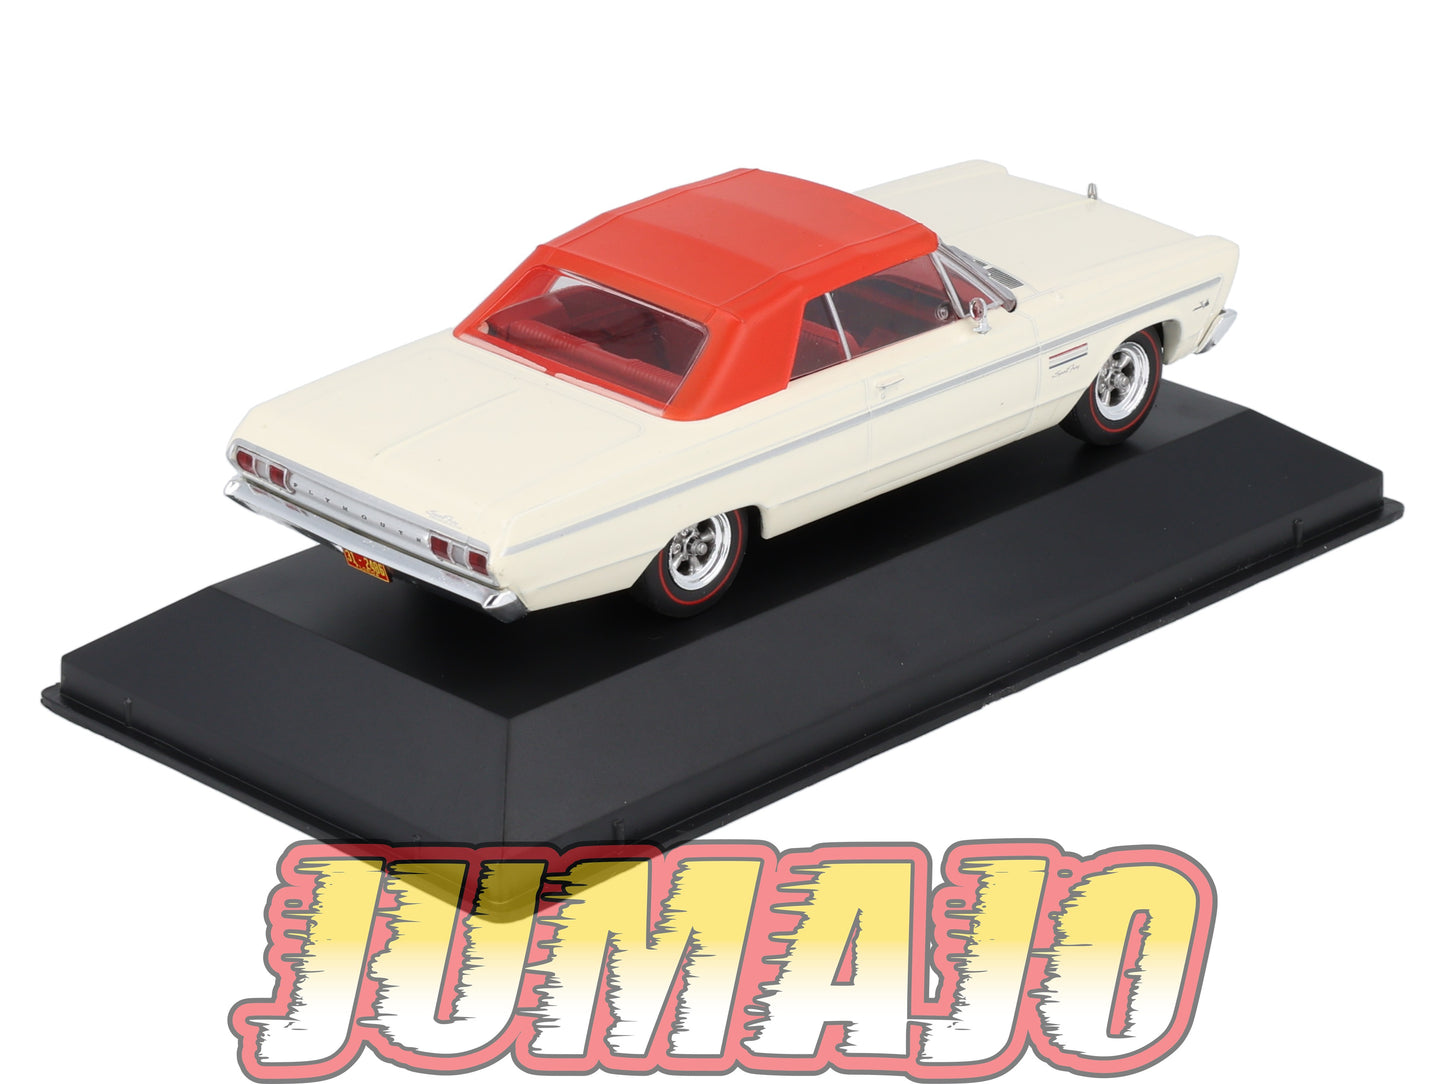 AC71 Voiture 1/43 IXO altaya Voitures américaines : PLYMOUTH Fury 426 Street Wedge 1965